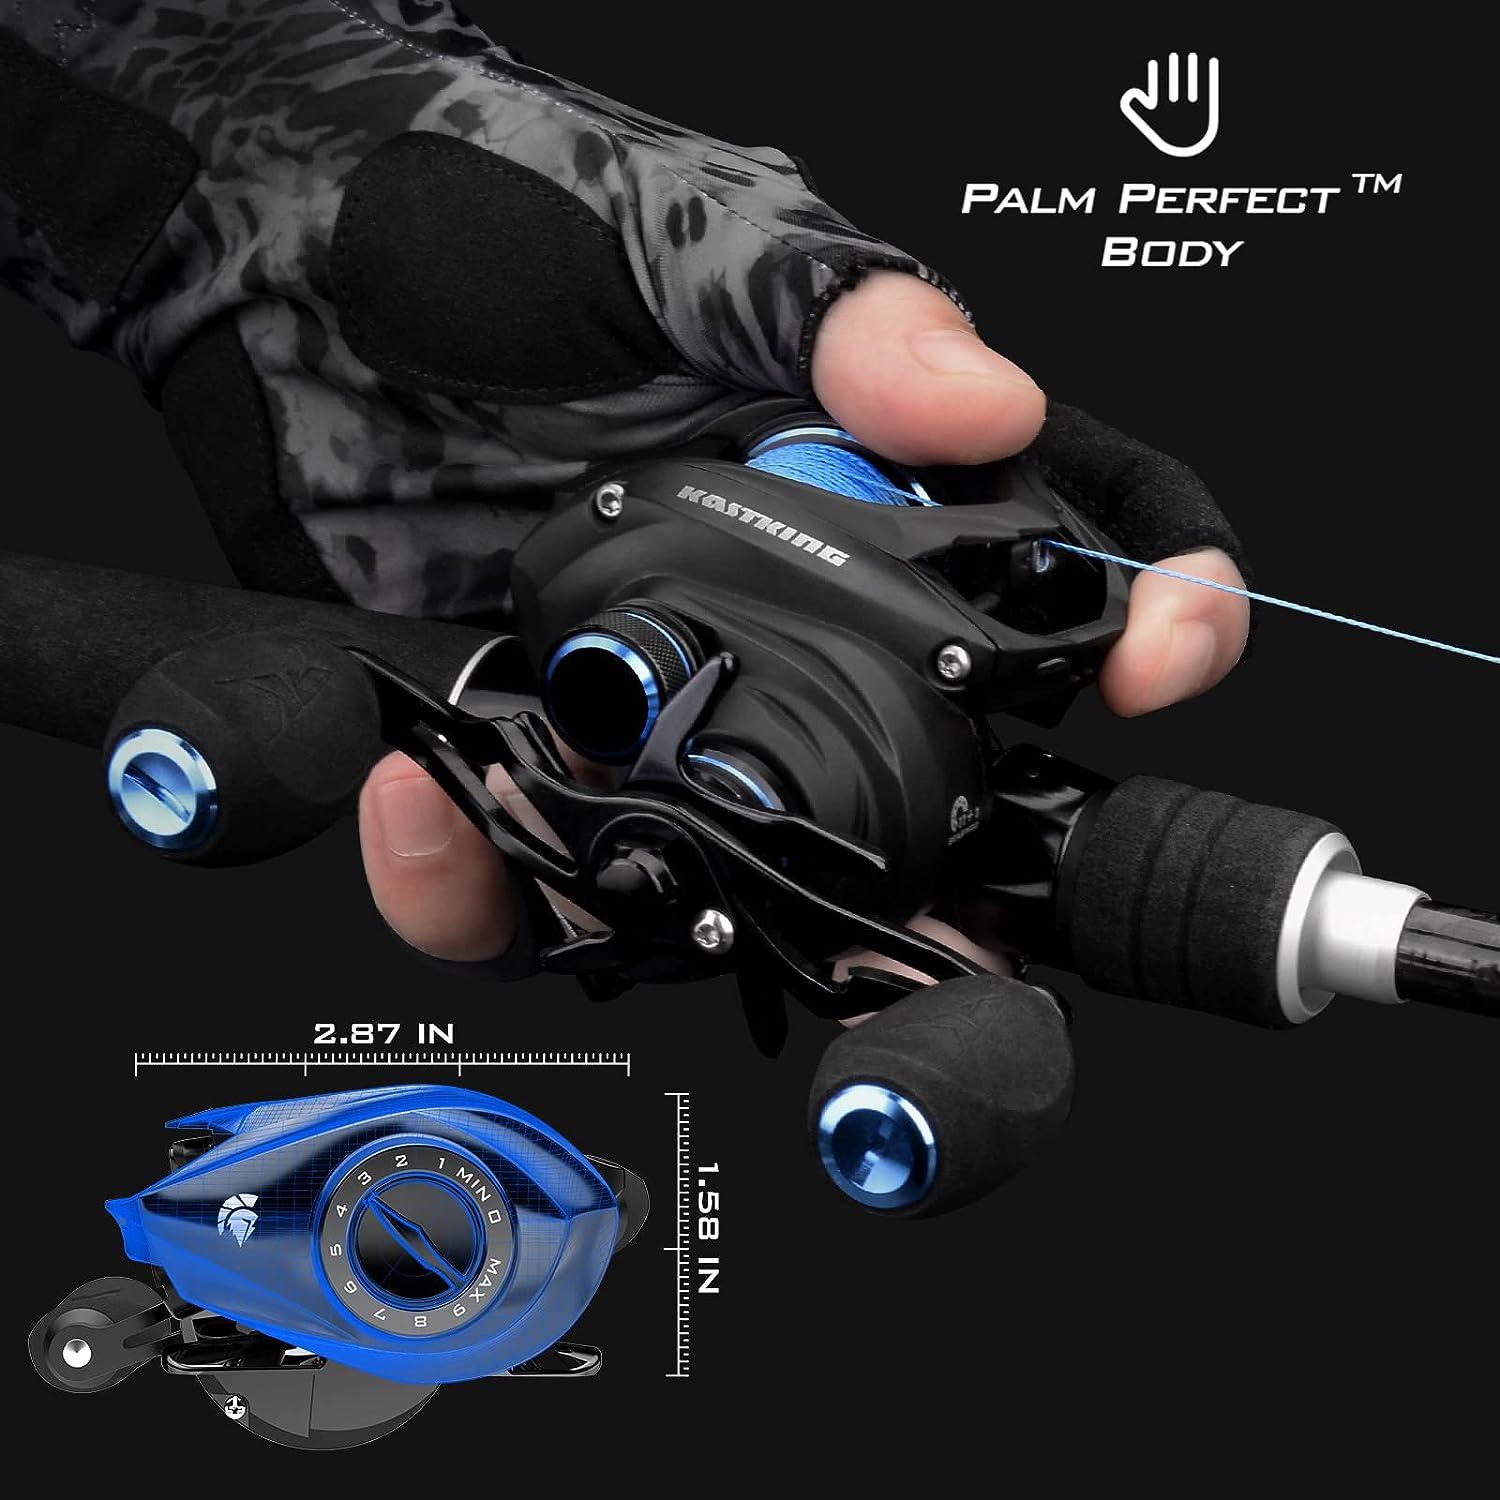 KastKing Verus Baitcasting Fishing Reel, New Assassin Version, Only 5.4 oz.  Carbon Fiber Frame & Side Covers, Carbon Fiber Drag System & 11+1 Double  Shielded Ball Bearings, 8.1:1 Gear Ratio Right Handed-8.1:1